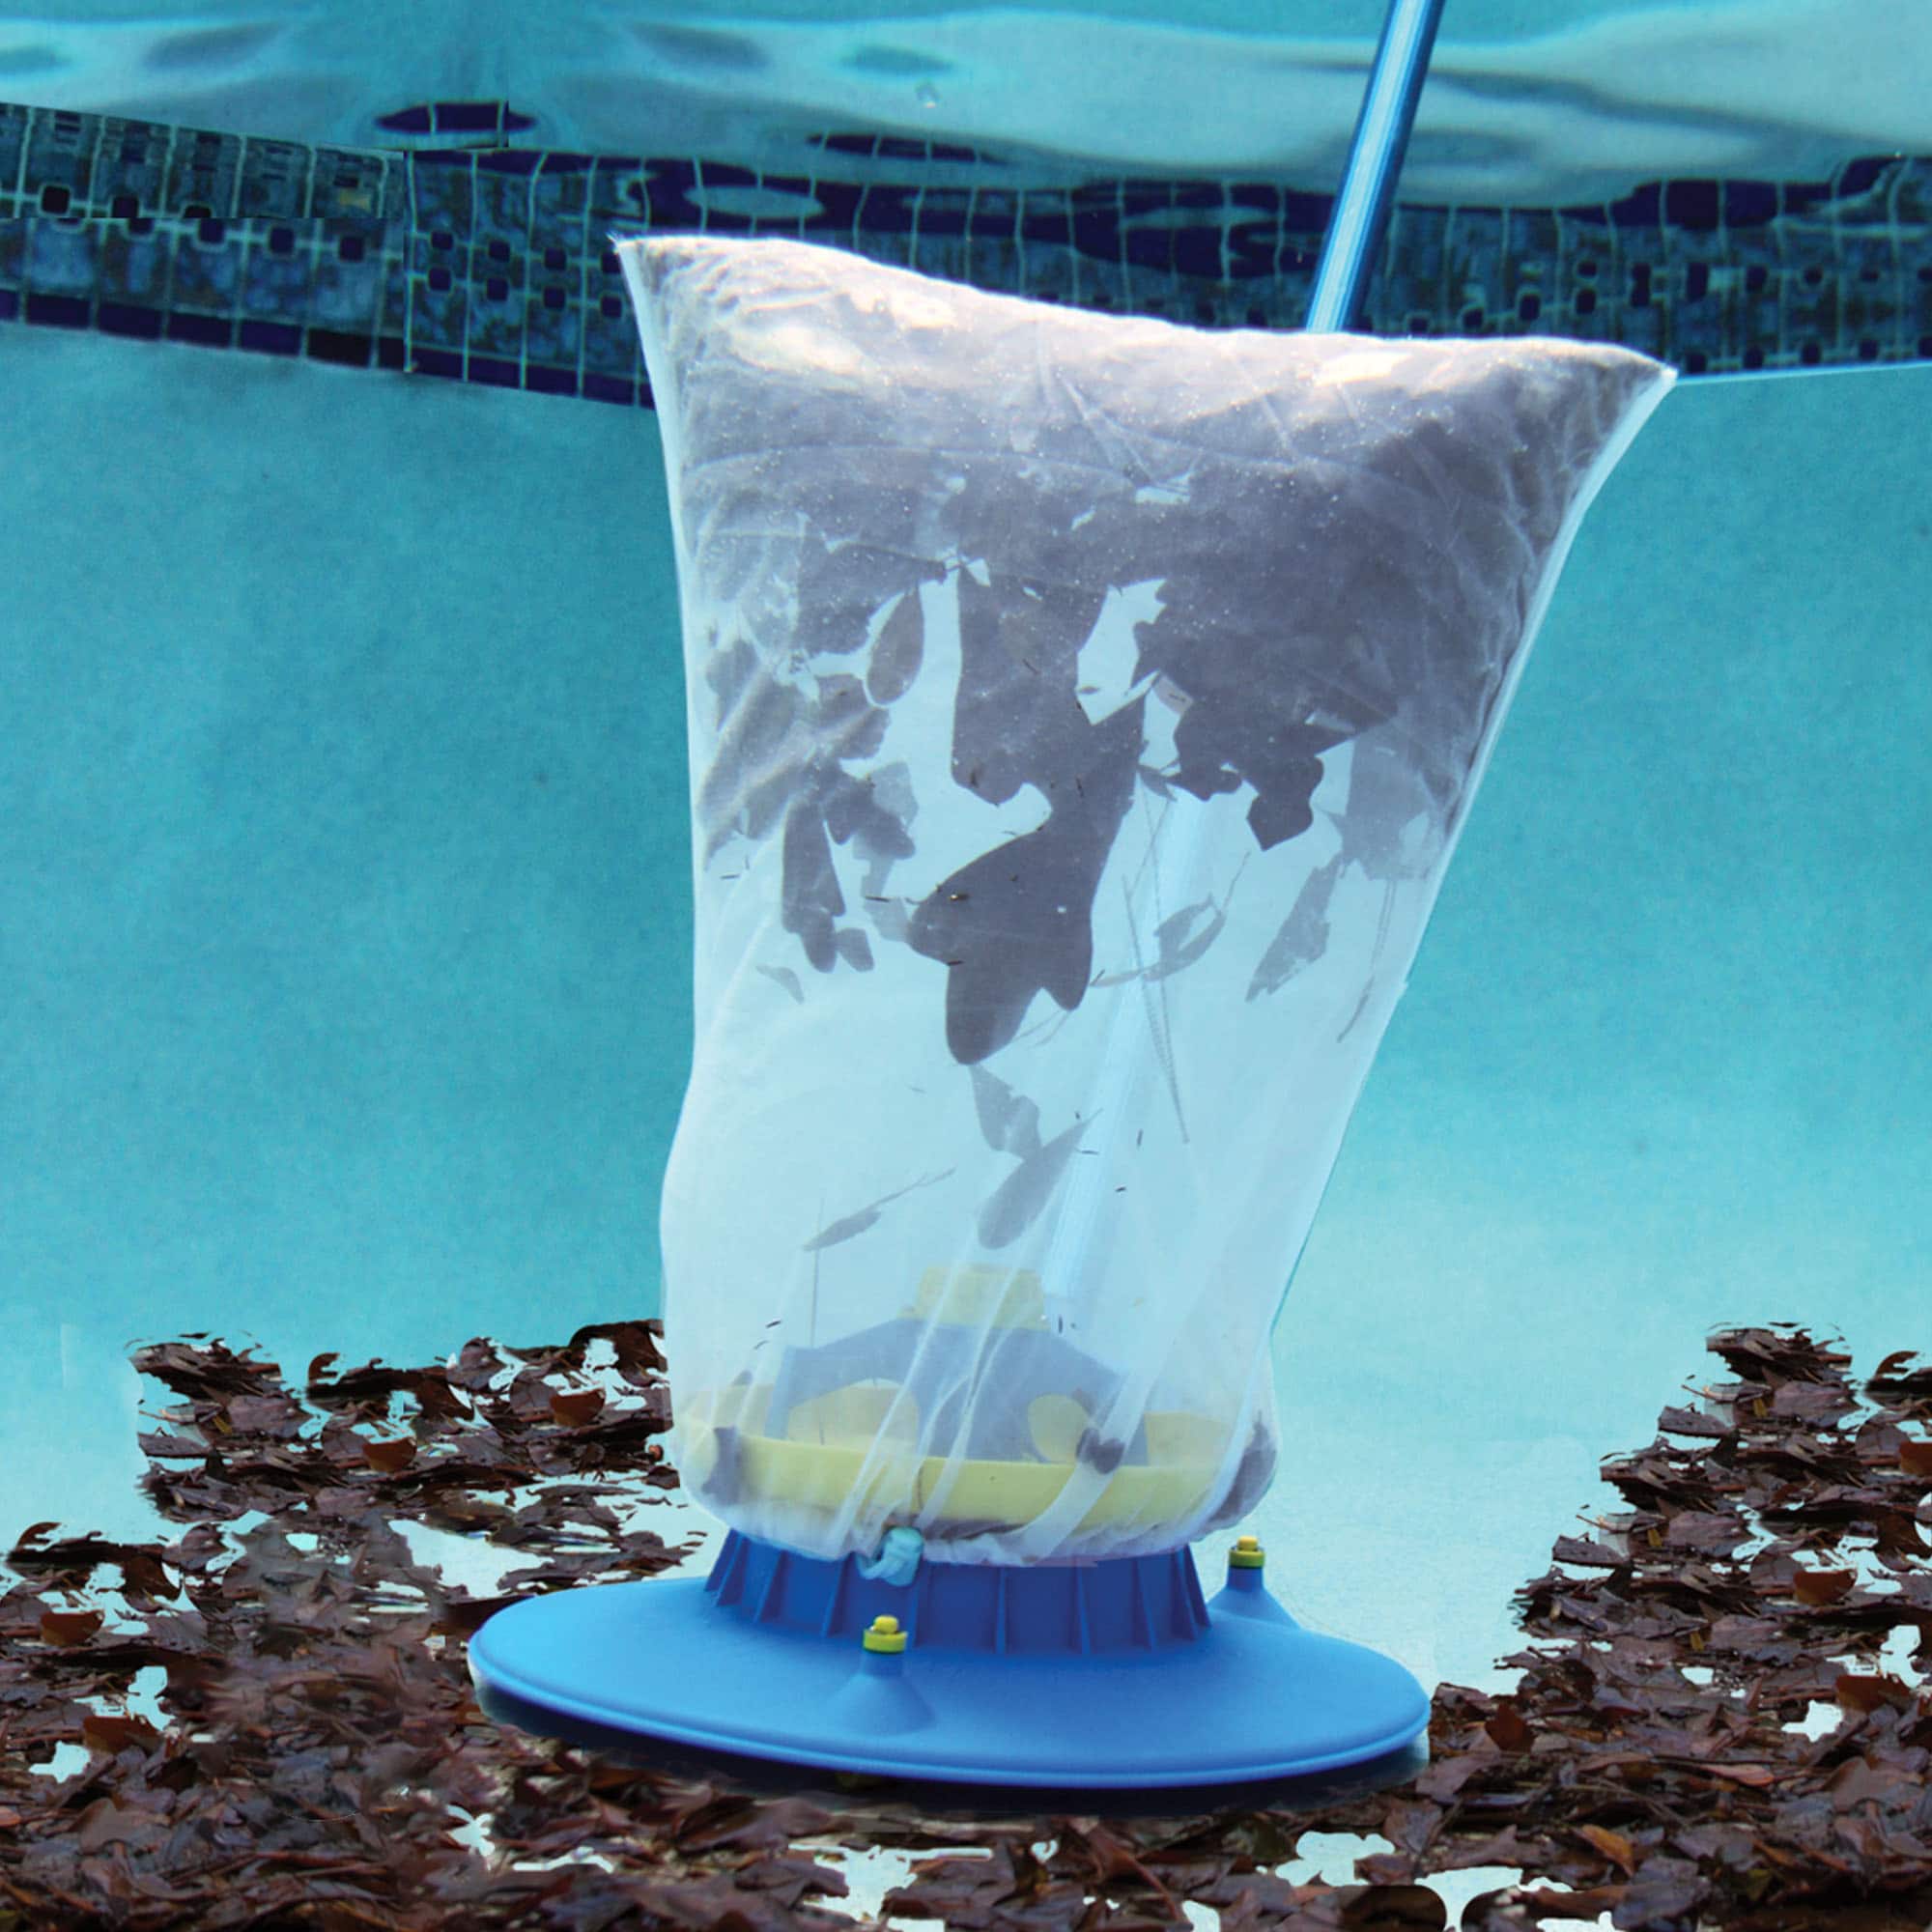 Image for Pool Vacuums